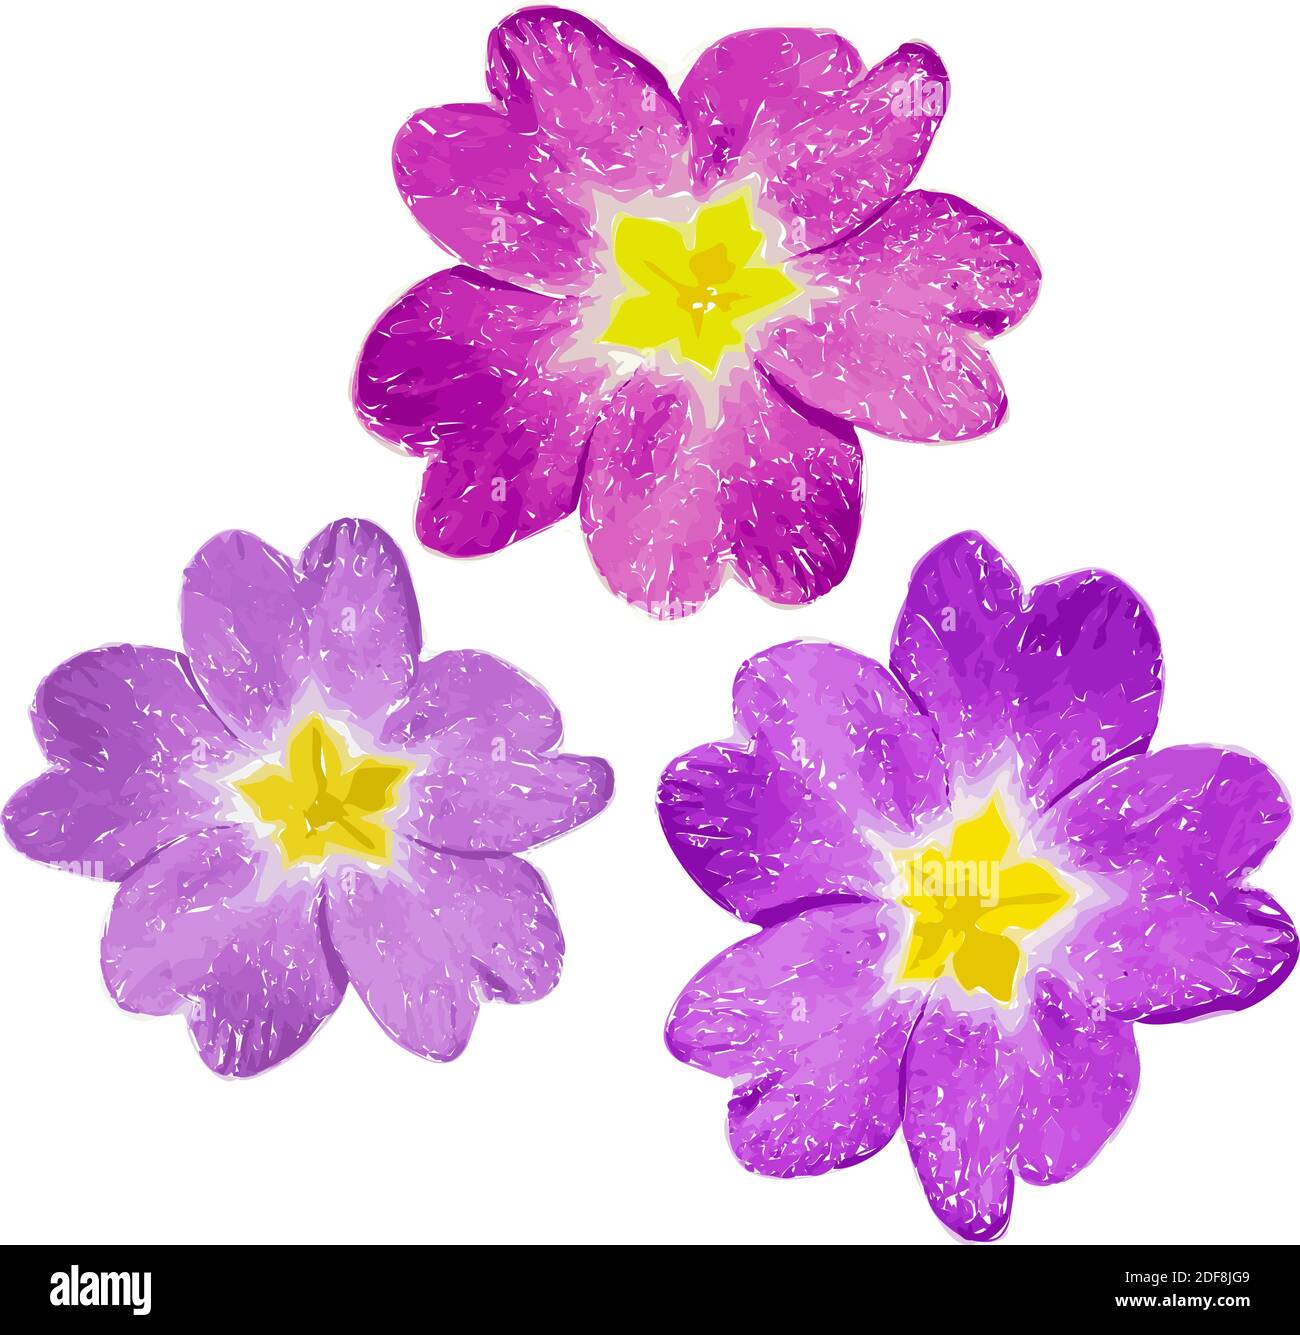 Pink and violet flower with yellow middle isolated on white background. Illustration. Stock Vector